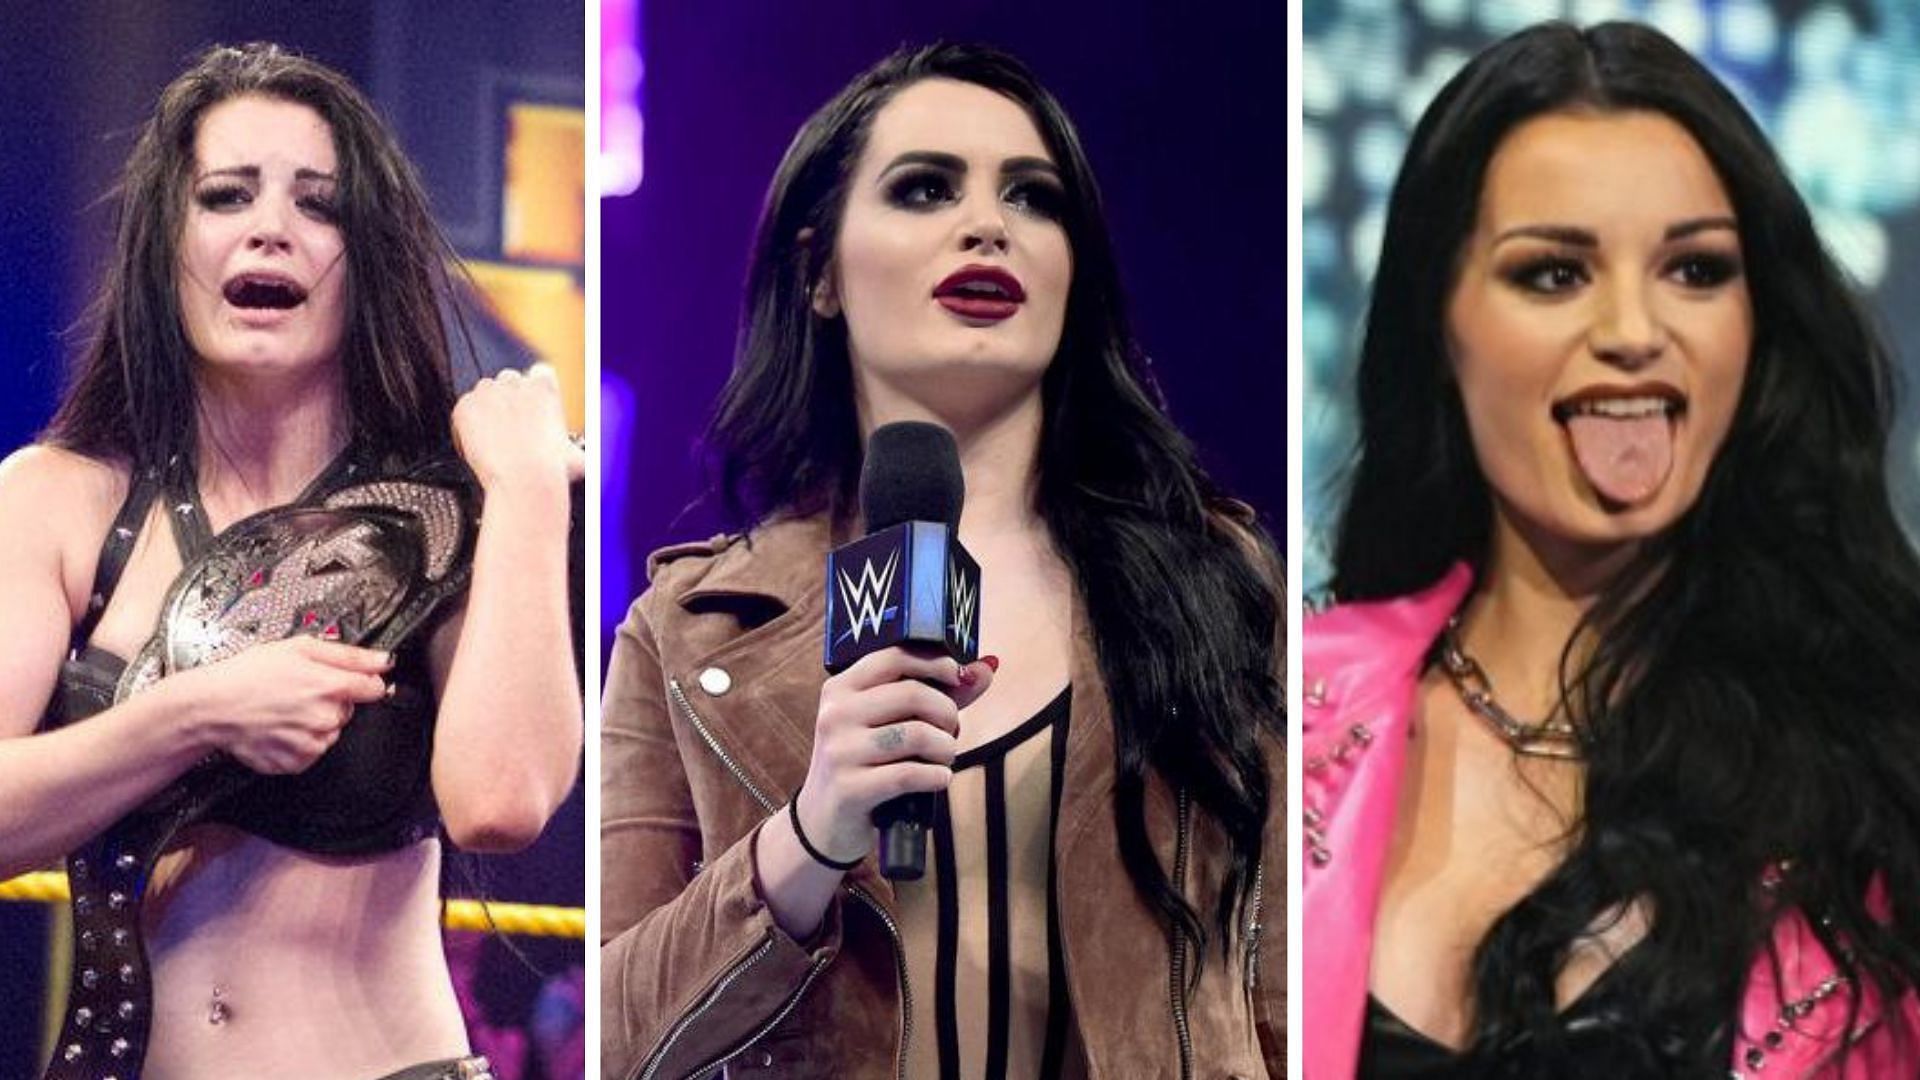 Former WWE Superstar Paige will be returning to the ring in AEW at Full Gear